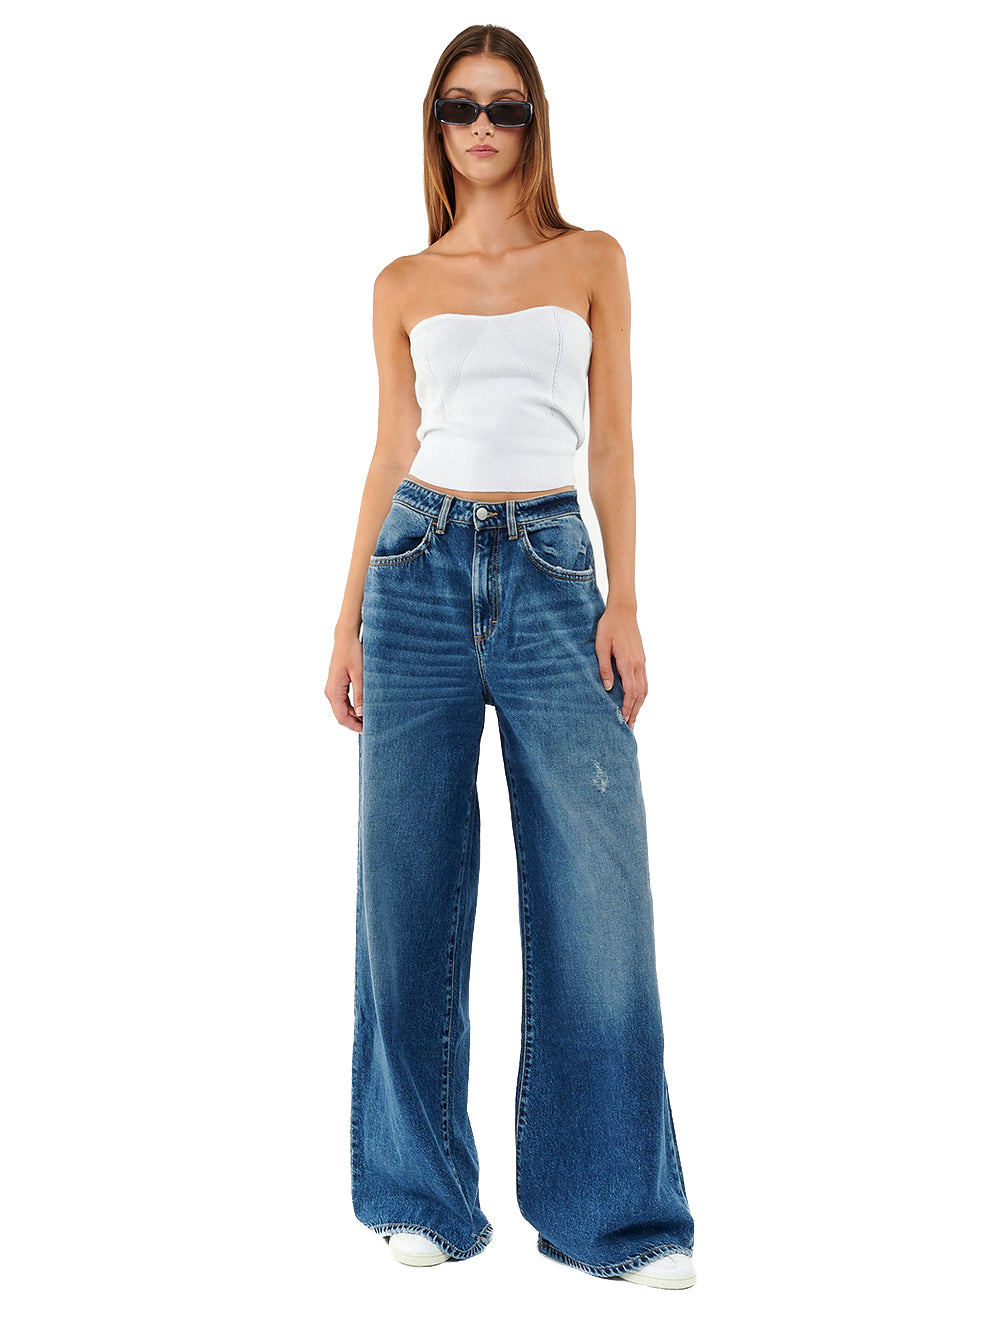 Kendal women's jeans with flared leg